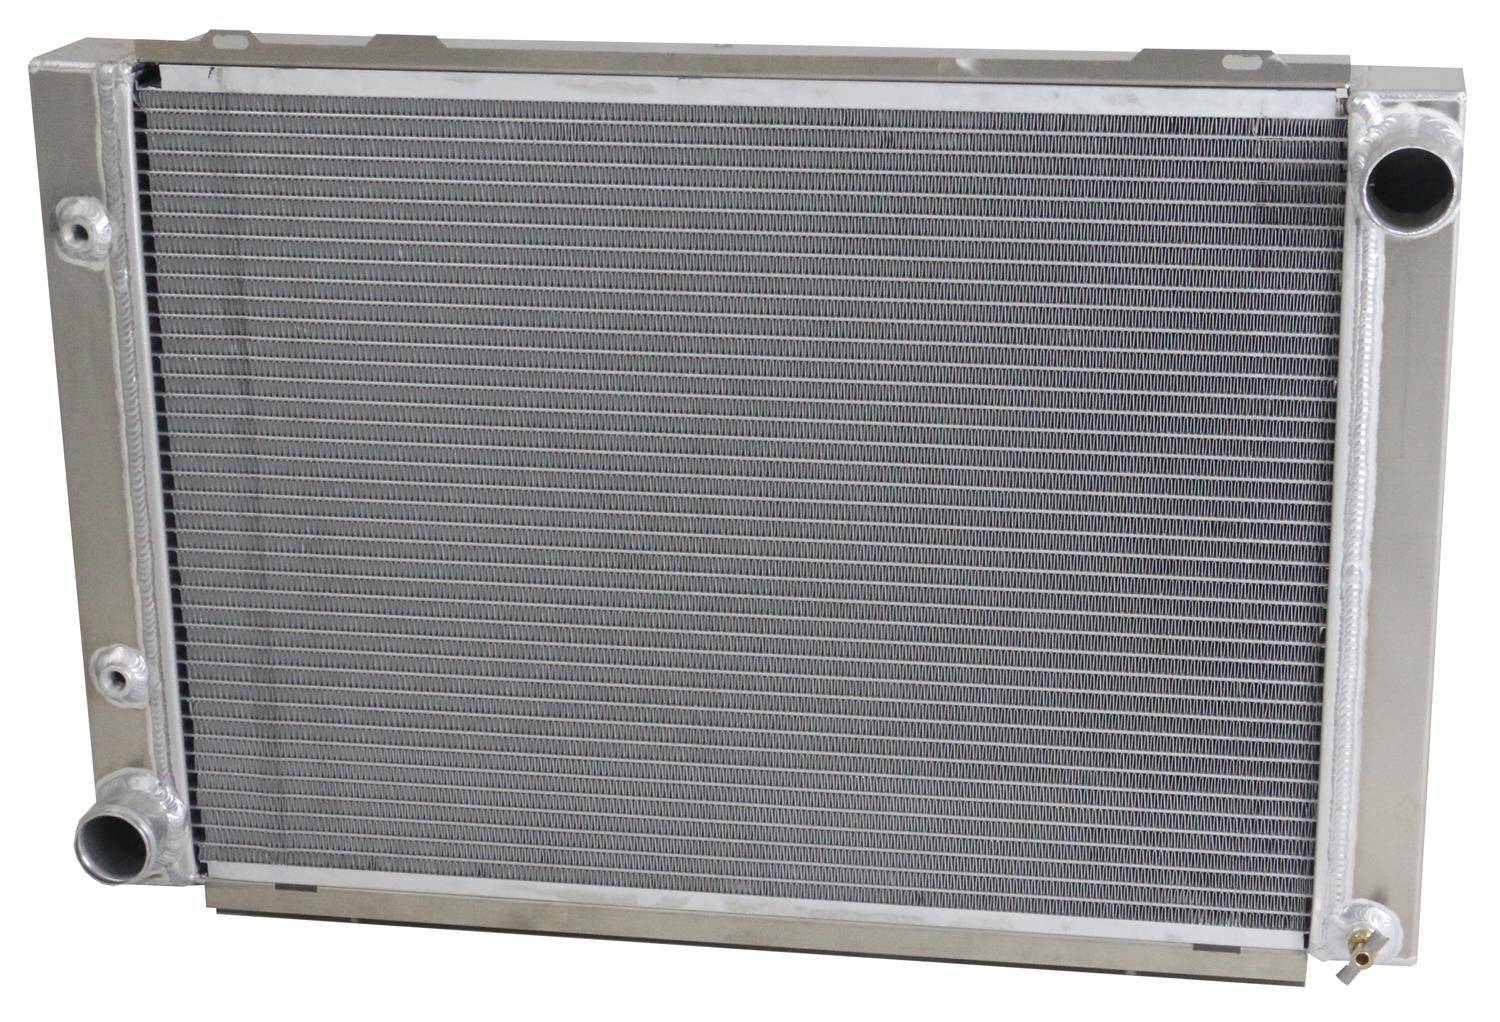 Wizard Cooling Inc - Wizard Cooling - 1966-1967 Lincoln Aluminum Radiator - 41003-100